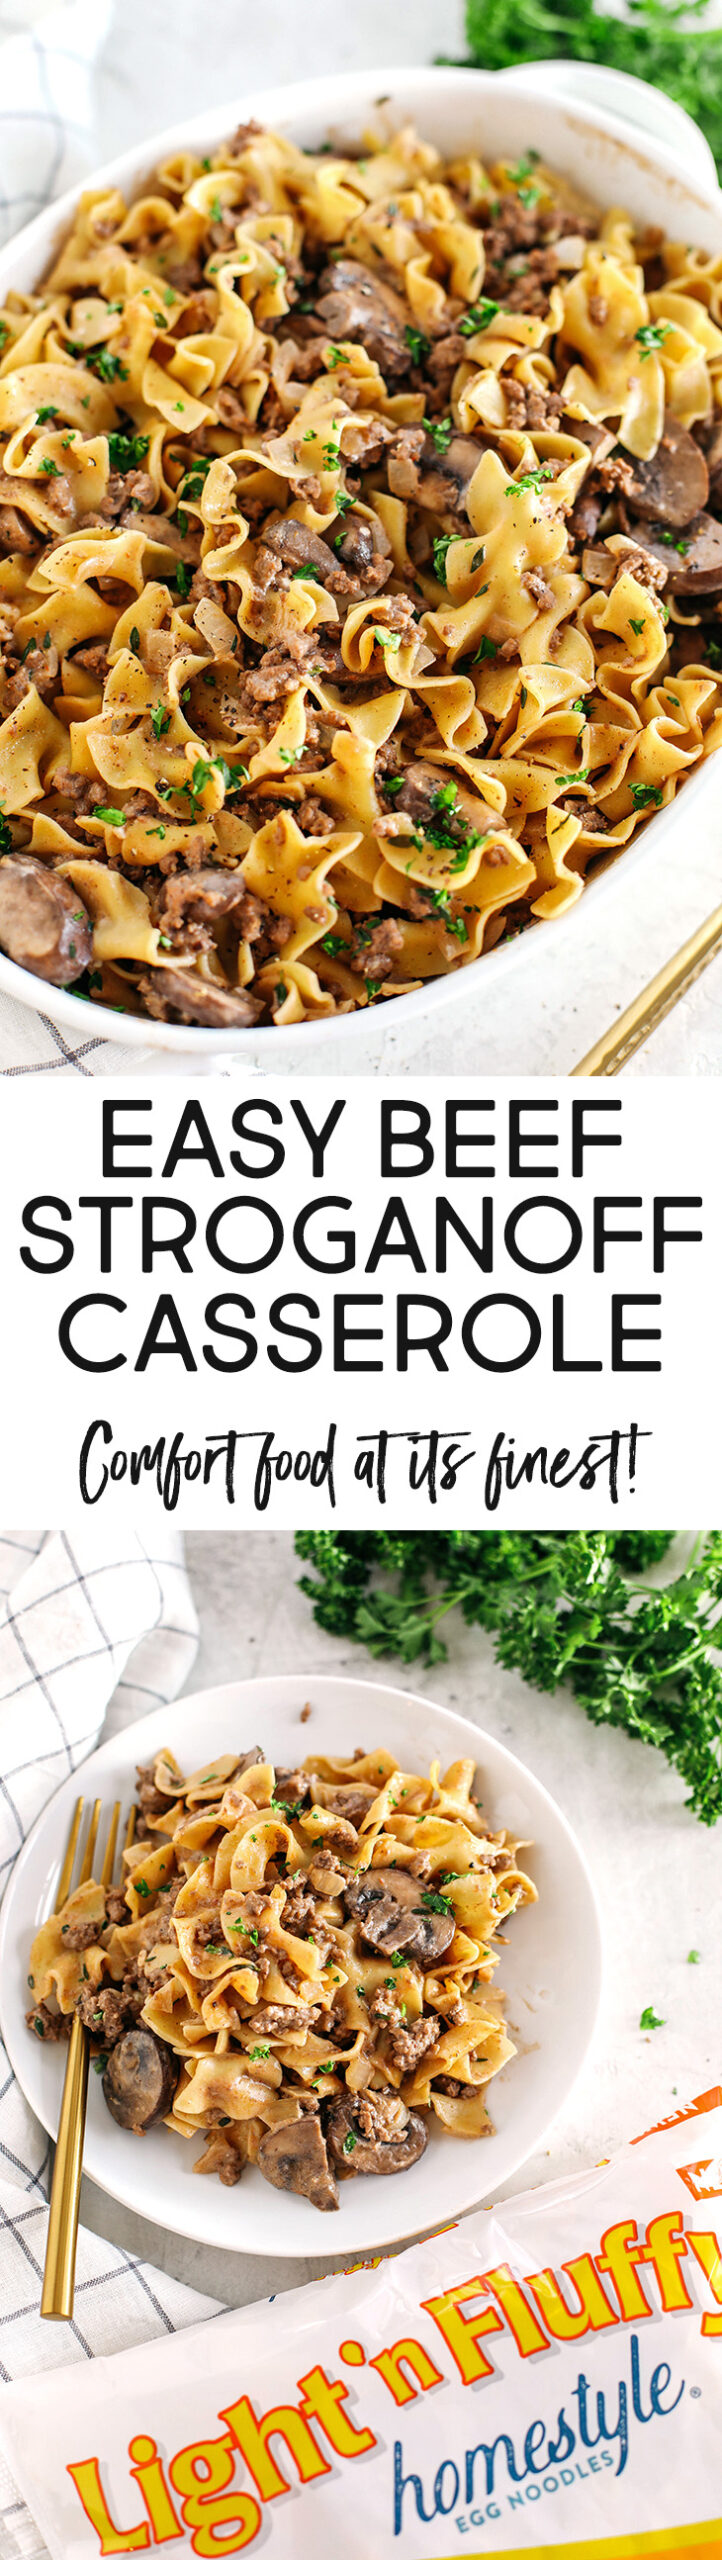 #ad This Easy Beef Stroganoff Casserole is the ultimate family-friendly comfort food!  The perfect weeknight meal made with Light ‘n Fluffy Homestyle #Noodles all smothered in the most delicious creamy mushroom sauce in just 30 minutes!  These #lightnfluffynoodles are the perfect size to soak up all that creamy sauce and I promise even non-mushroom eaters will love this!